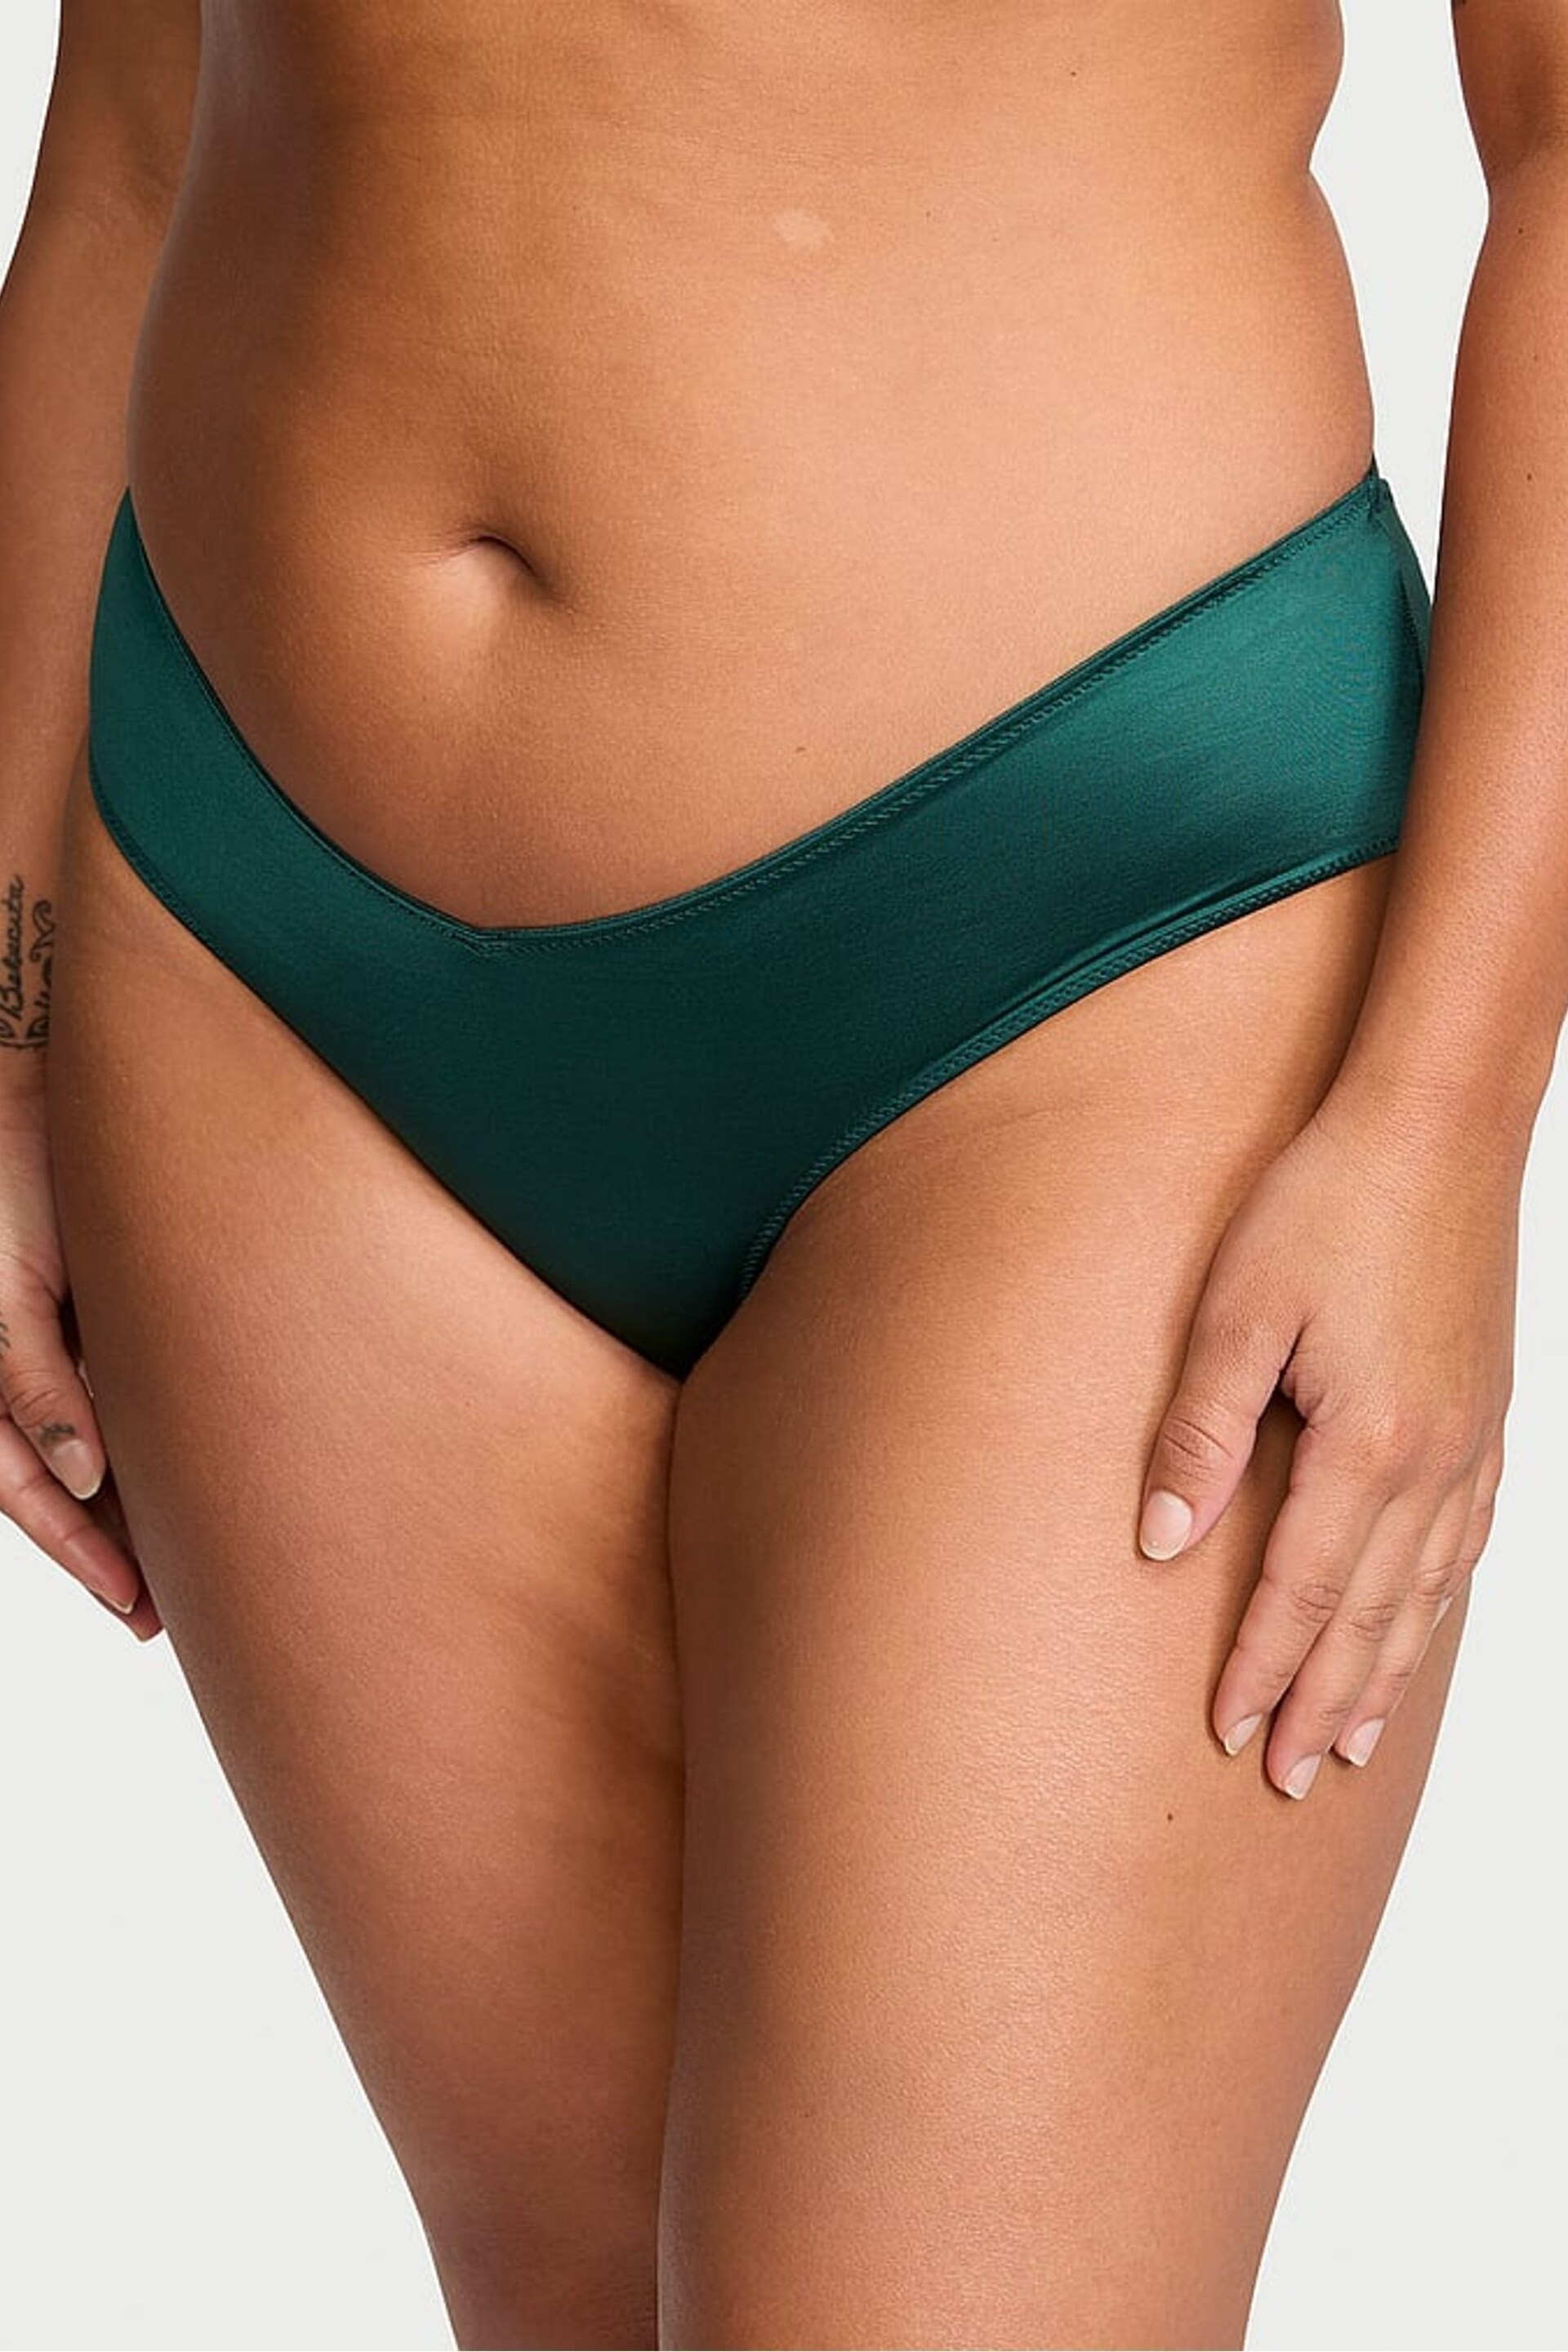 Victoria's Secret Green Mystique Cheeky Knickers - Image 1 of 3